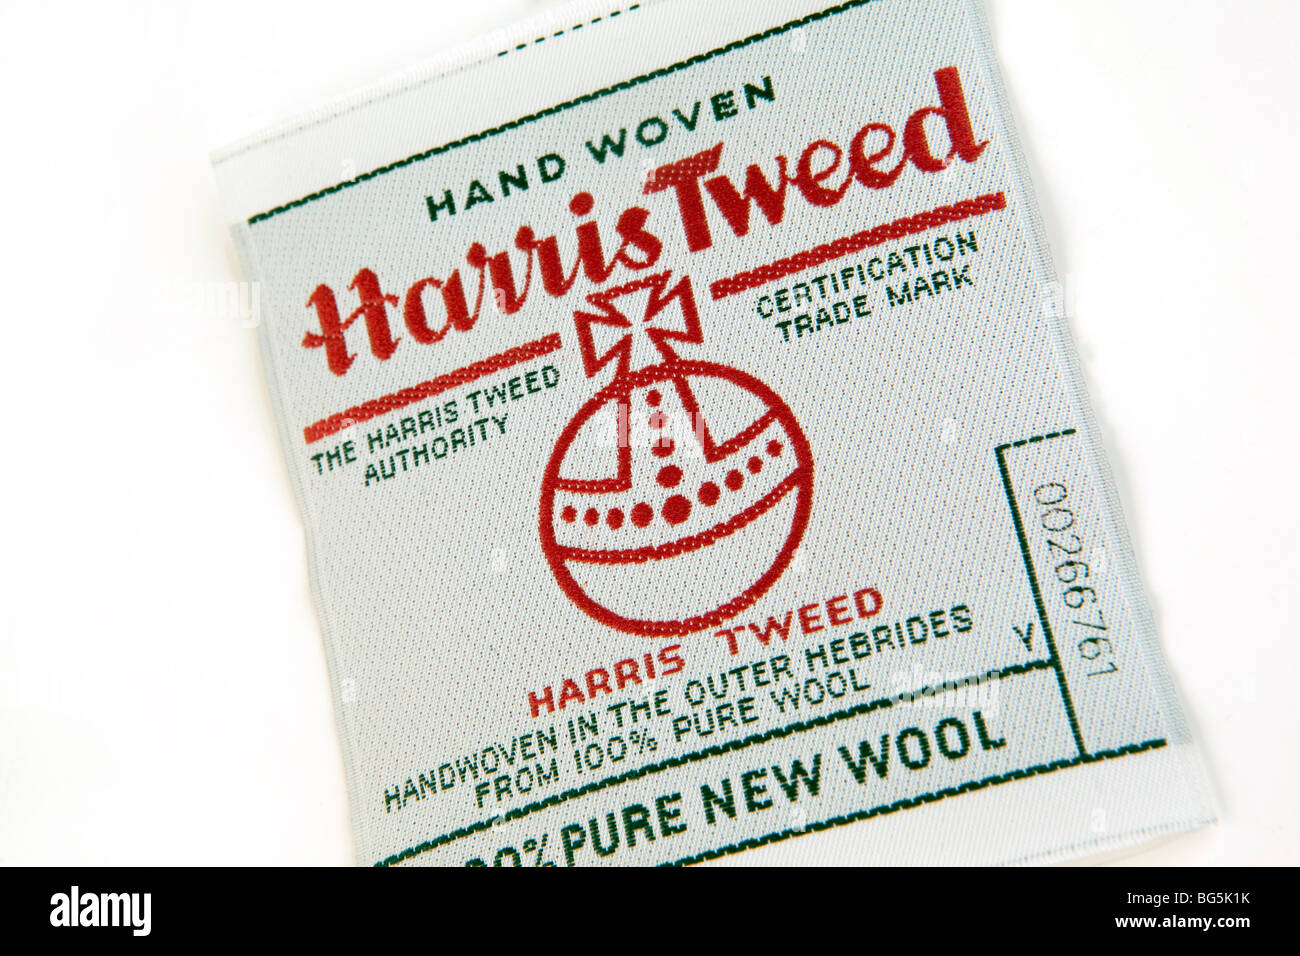 Crafts, Harris Tweed Authority certification label certifiying handwoven in Outer Hebrides Stock Photo